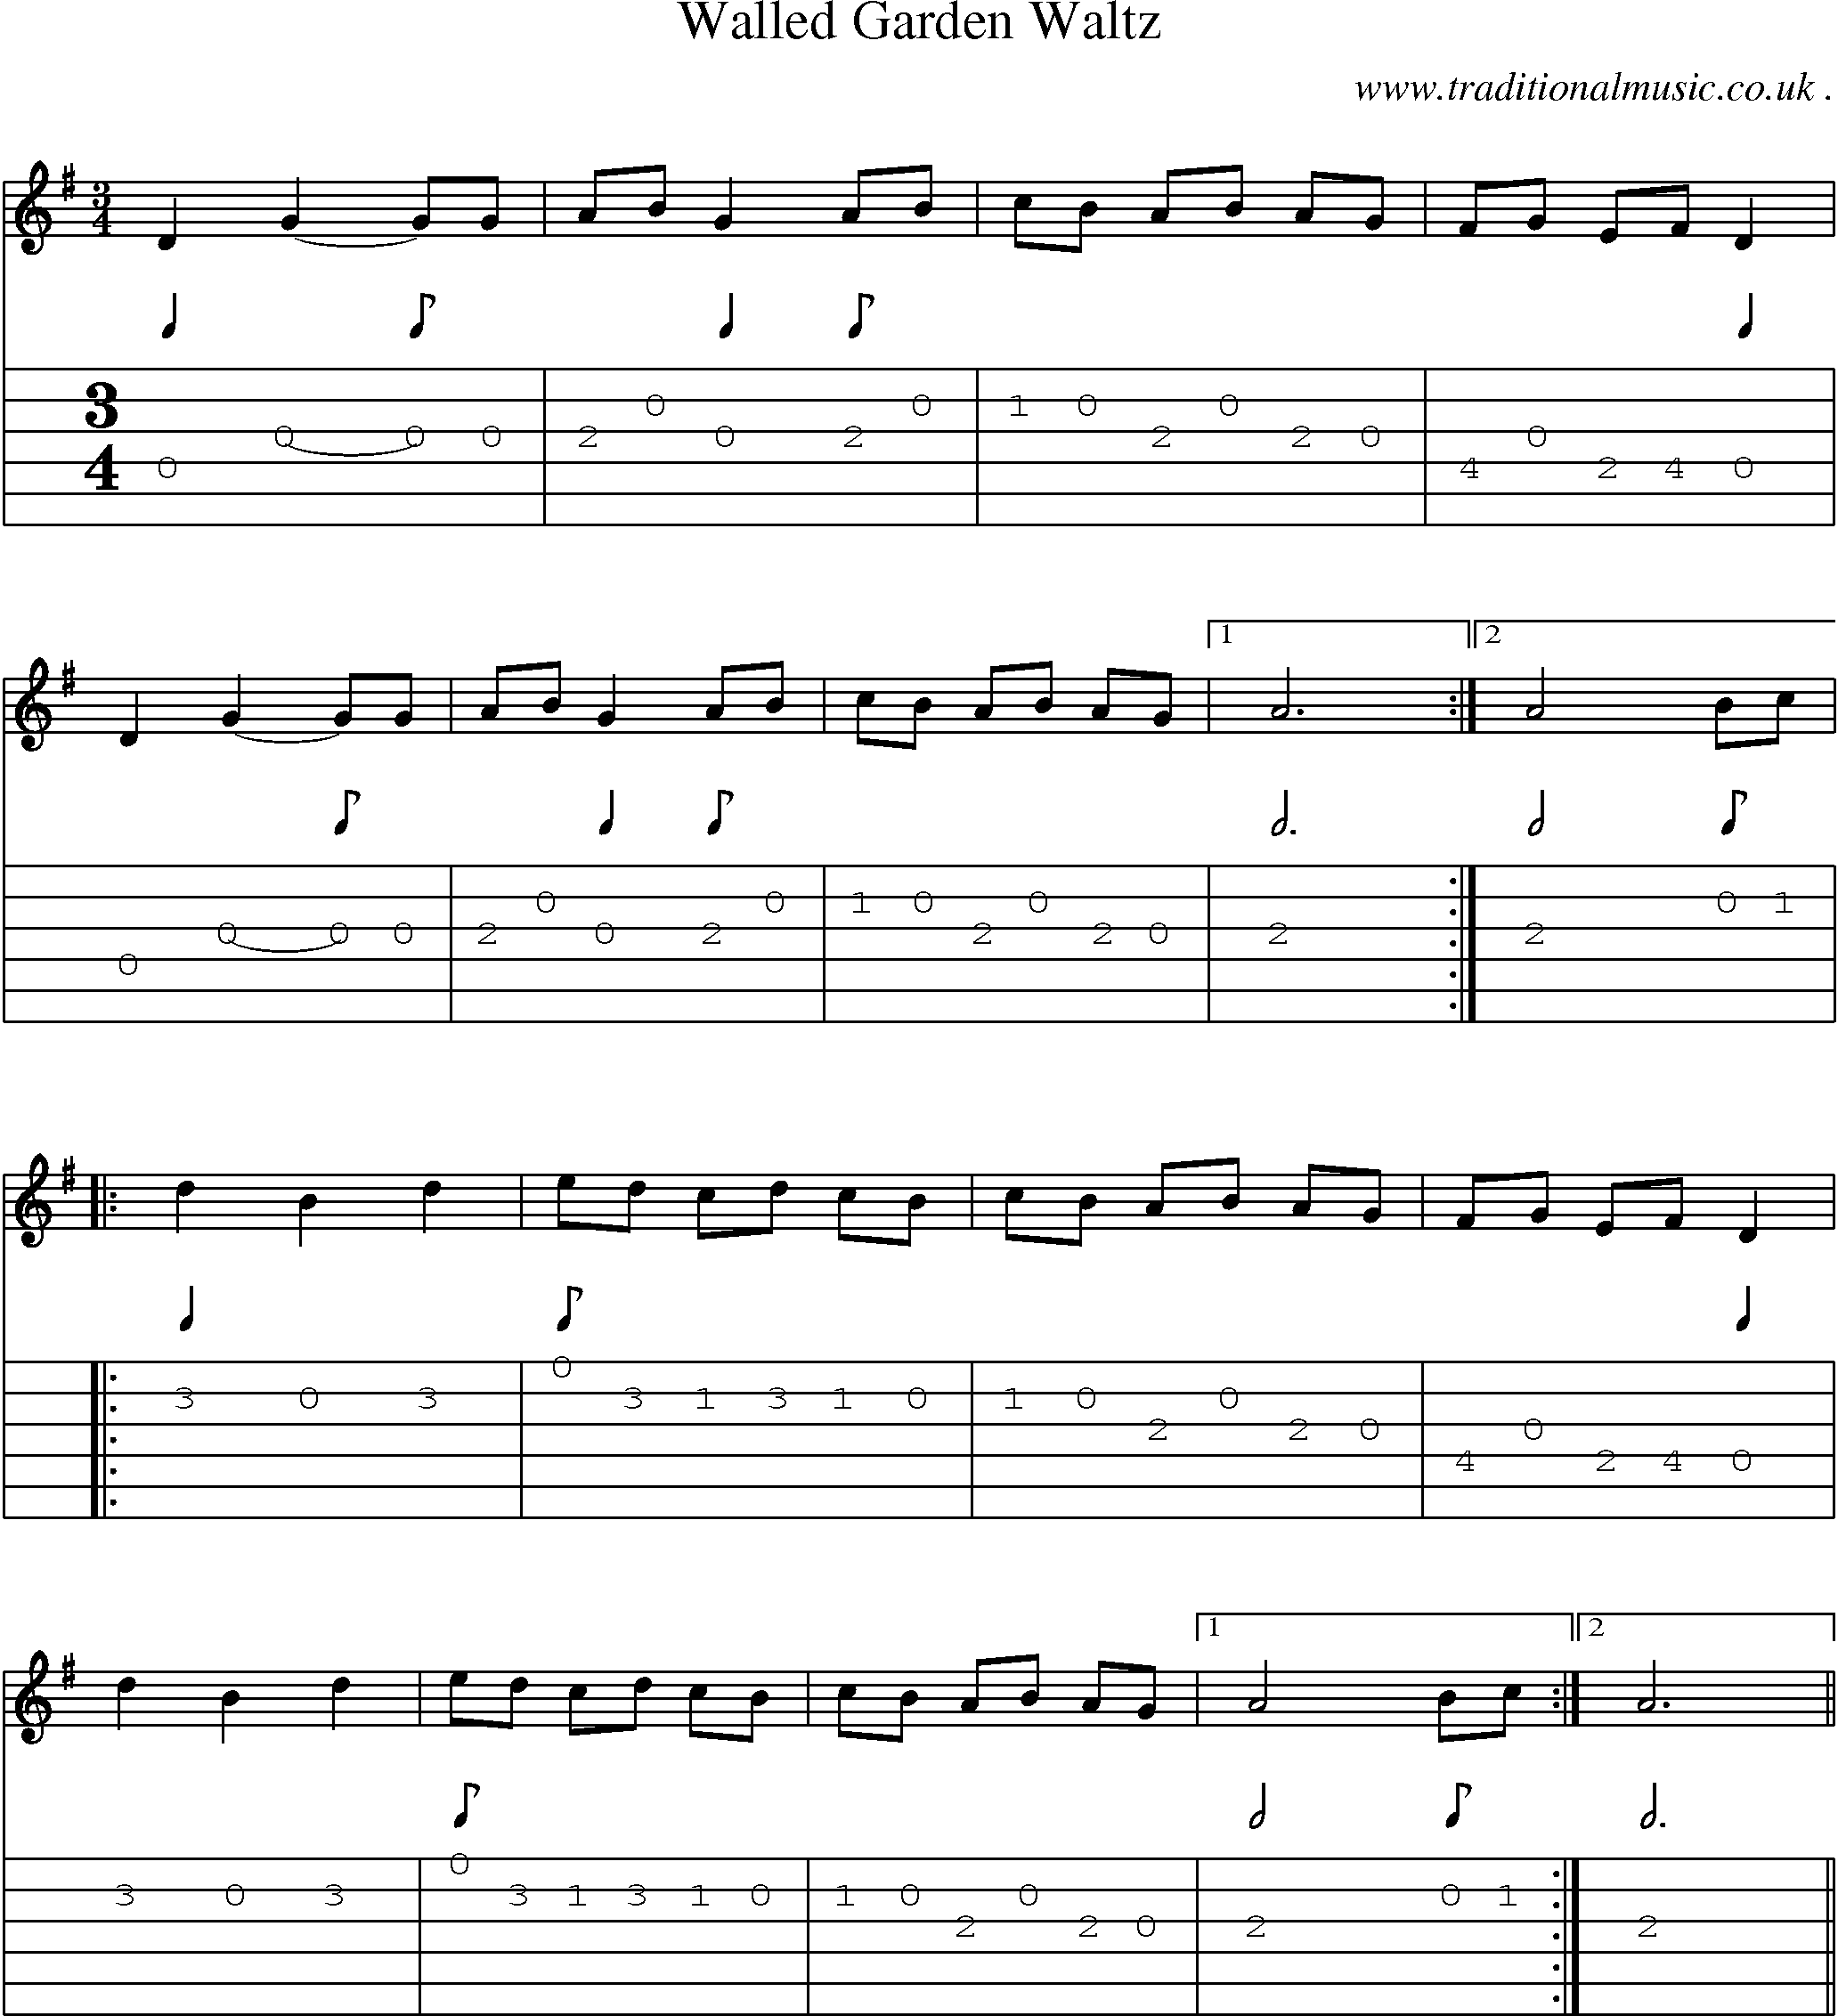 Sheet-Music and Guitar Tabs for Walled Garden Waltz